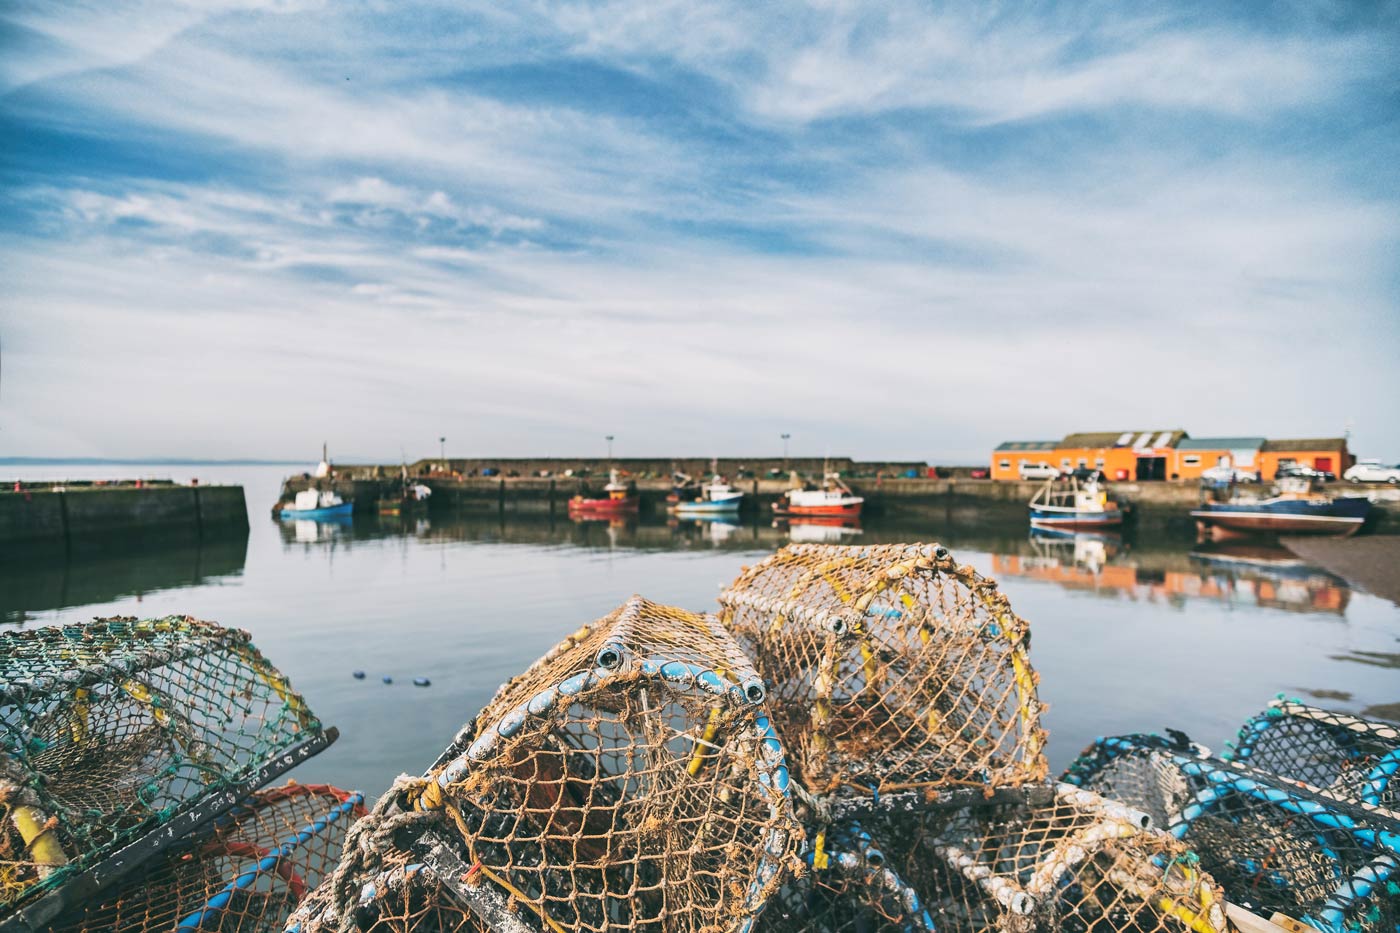 Lobster pots stacked onto each other in a small fishing port.
Port Seaton, Scotland, UK